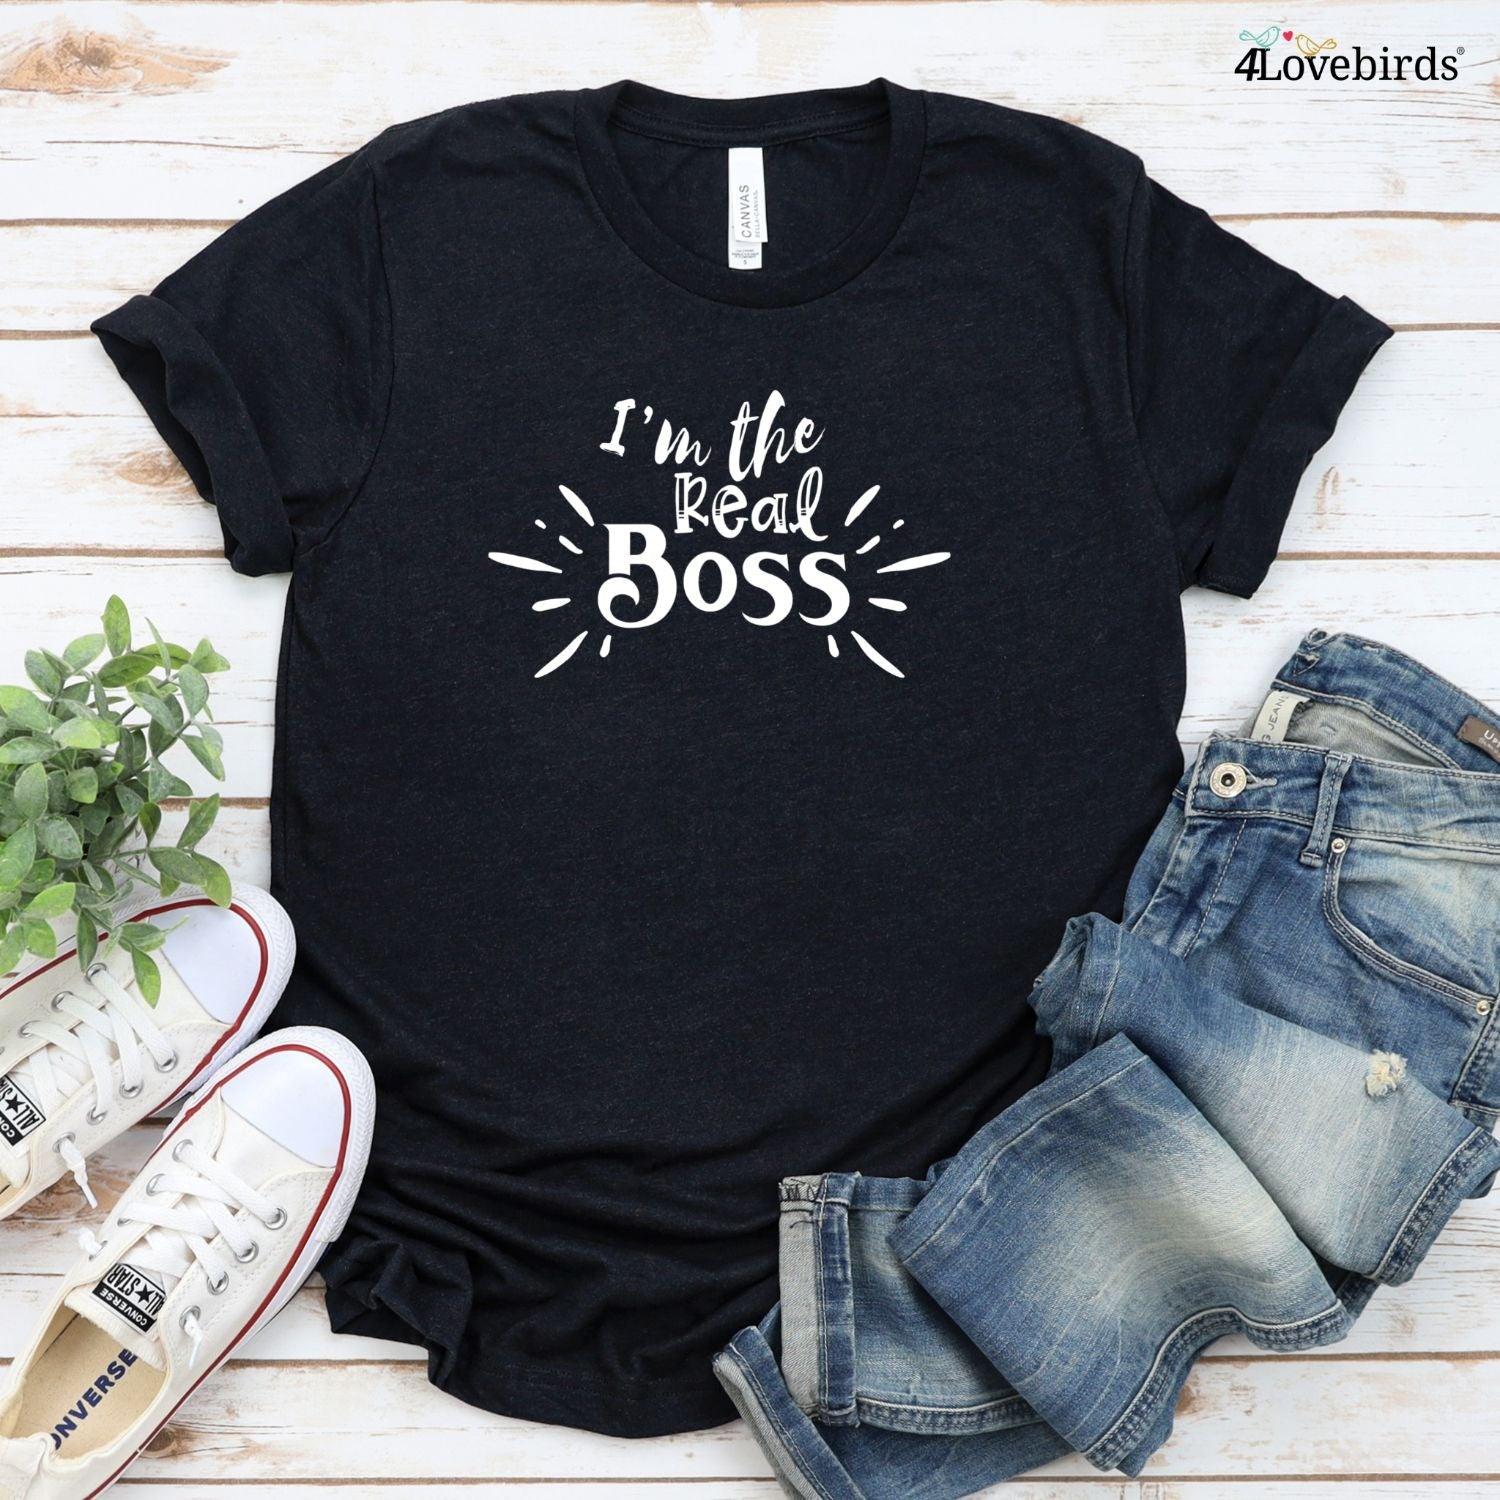 Matching Set: I'm The Boss/Real Boss Hoodie & T-Shirt - Funny Couples Gift for Valentine's Day T-shirts